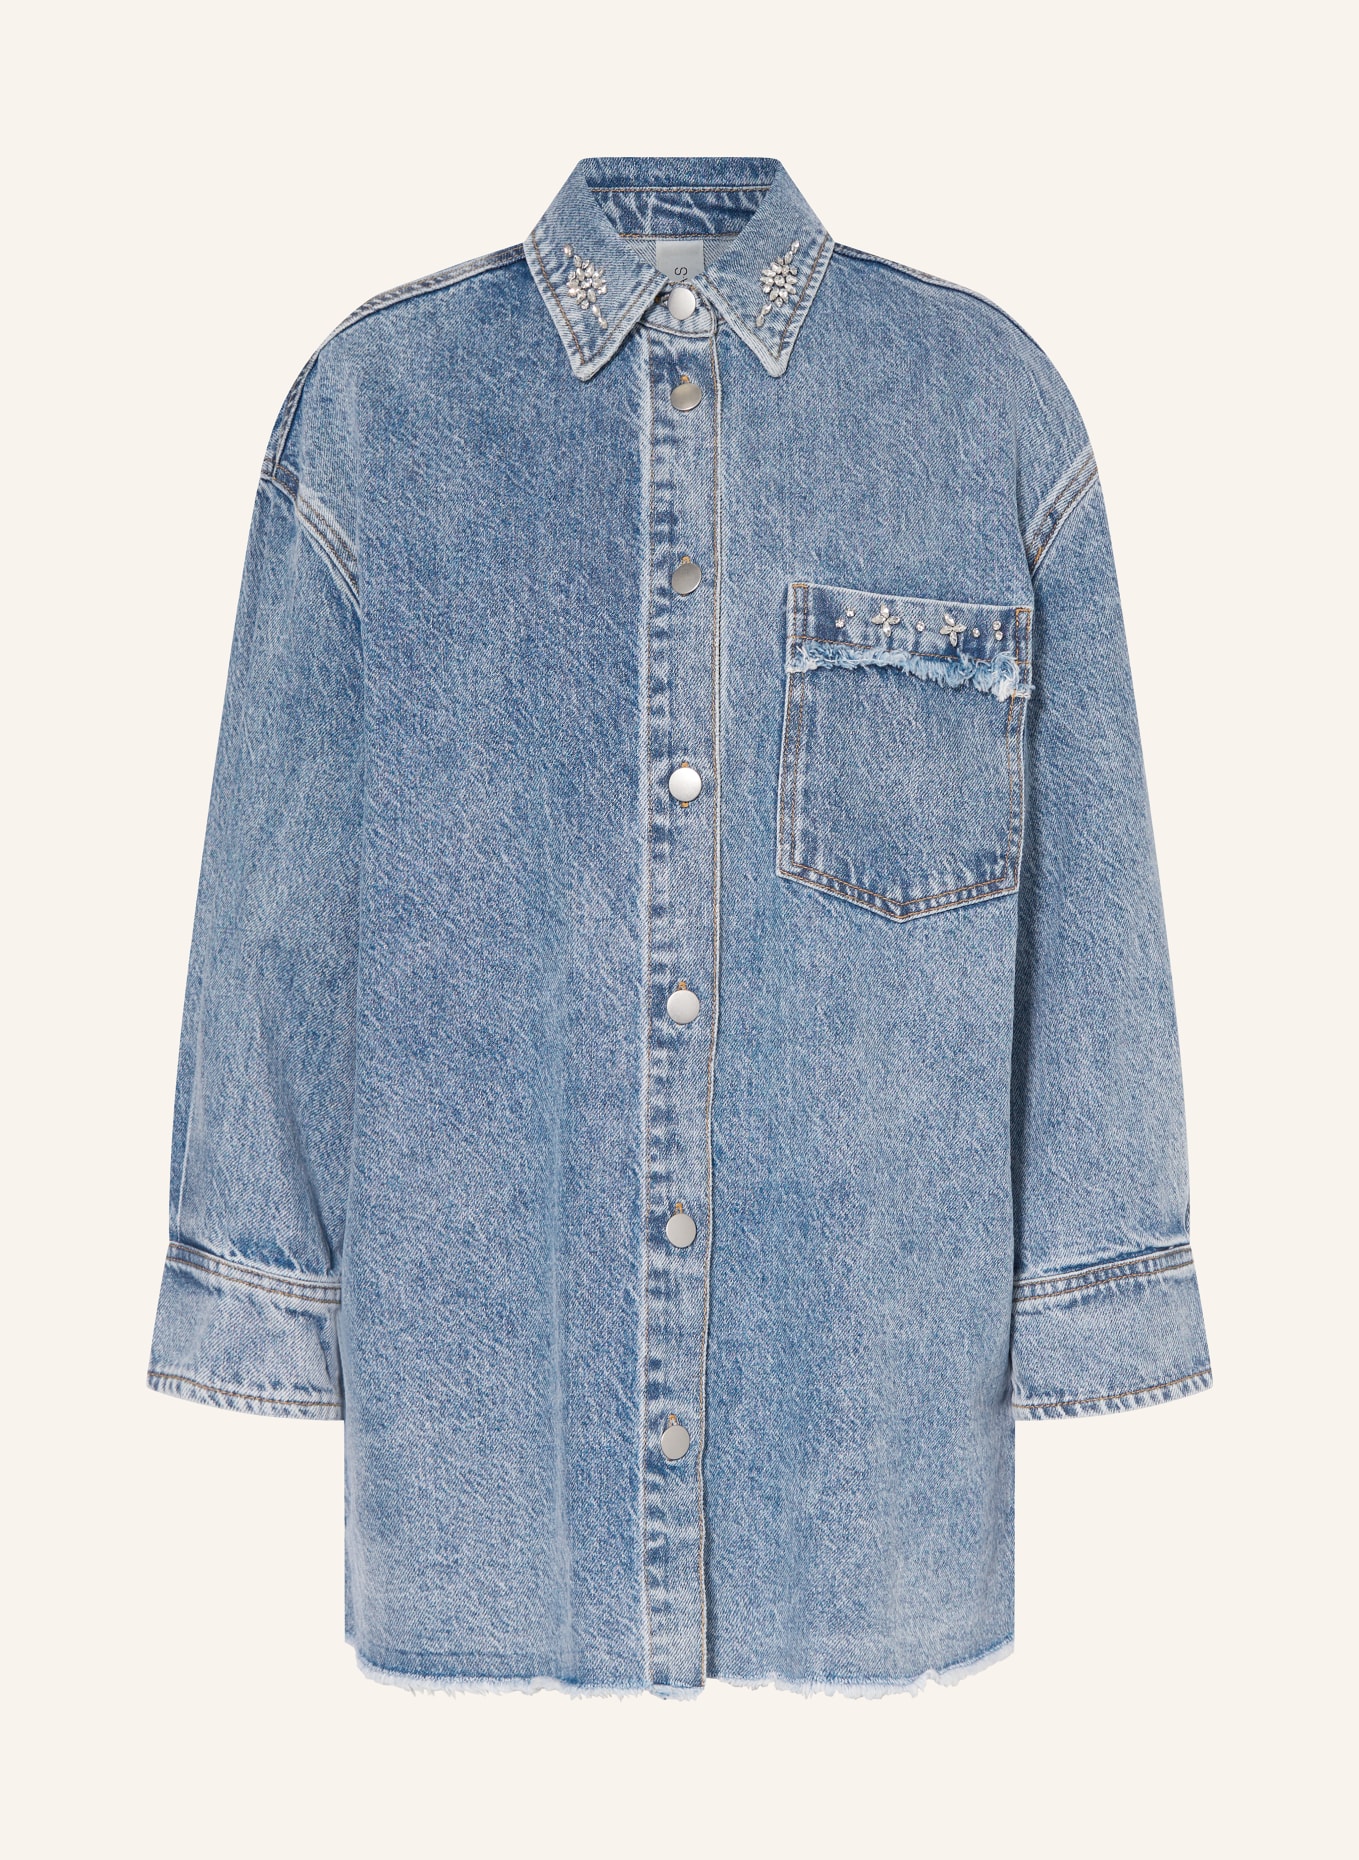 Y.A.S. Denim overshirt with 3/4 sleeves and decorative gems, Color: BLUE (Image 1)